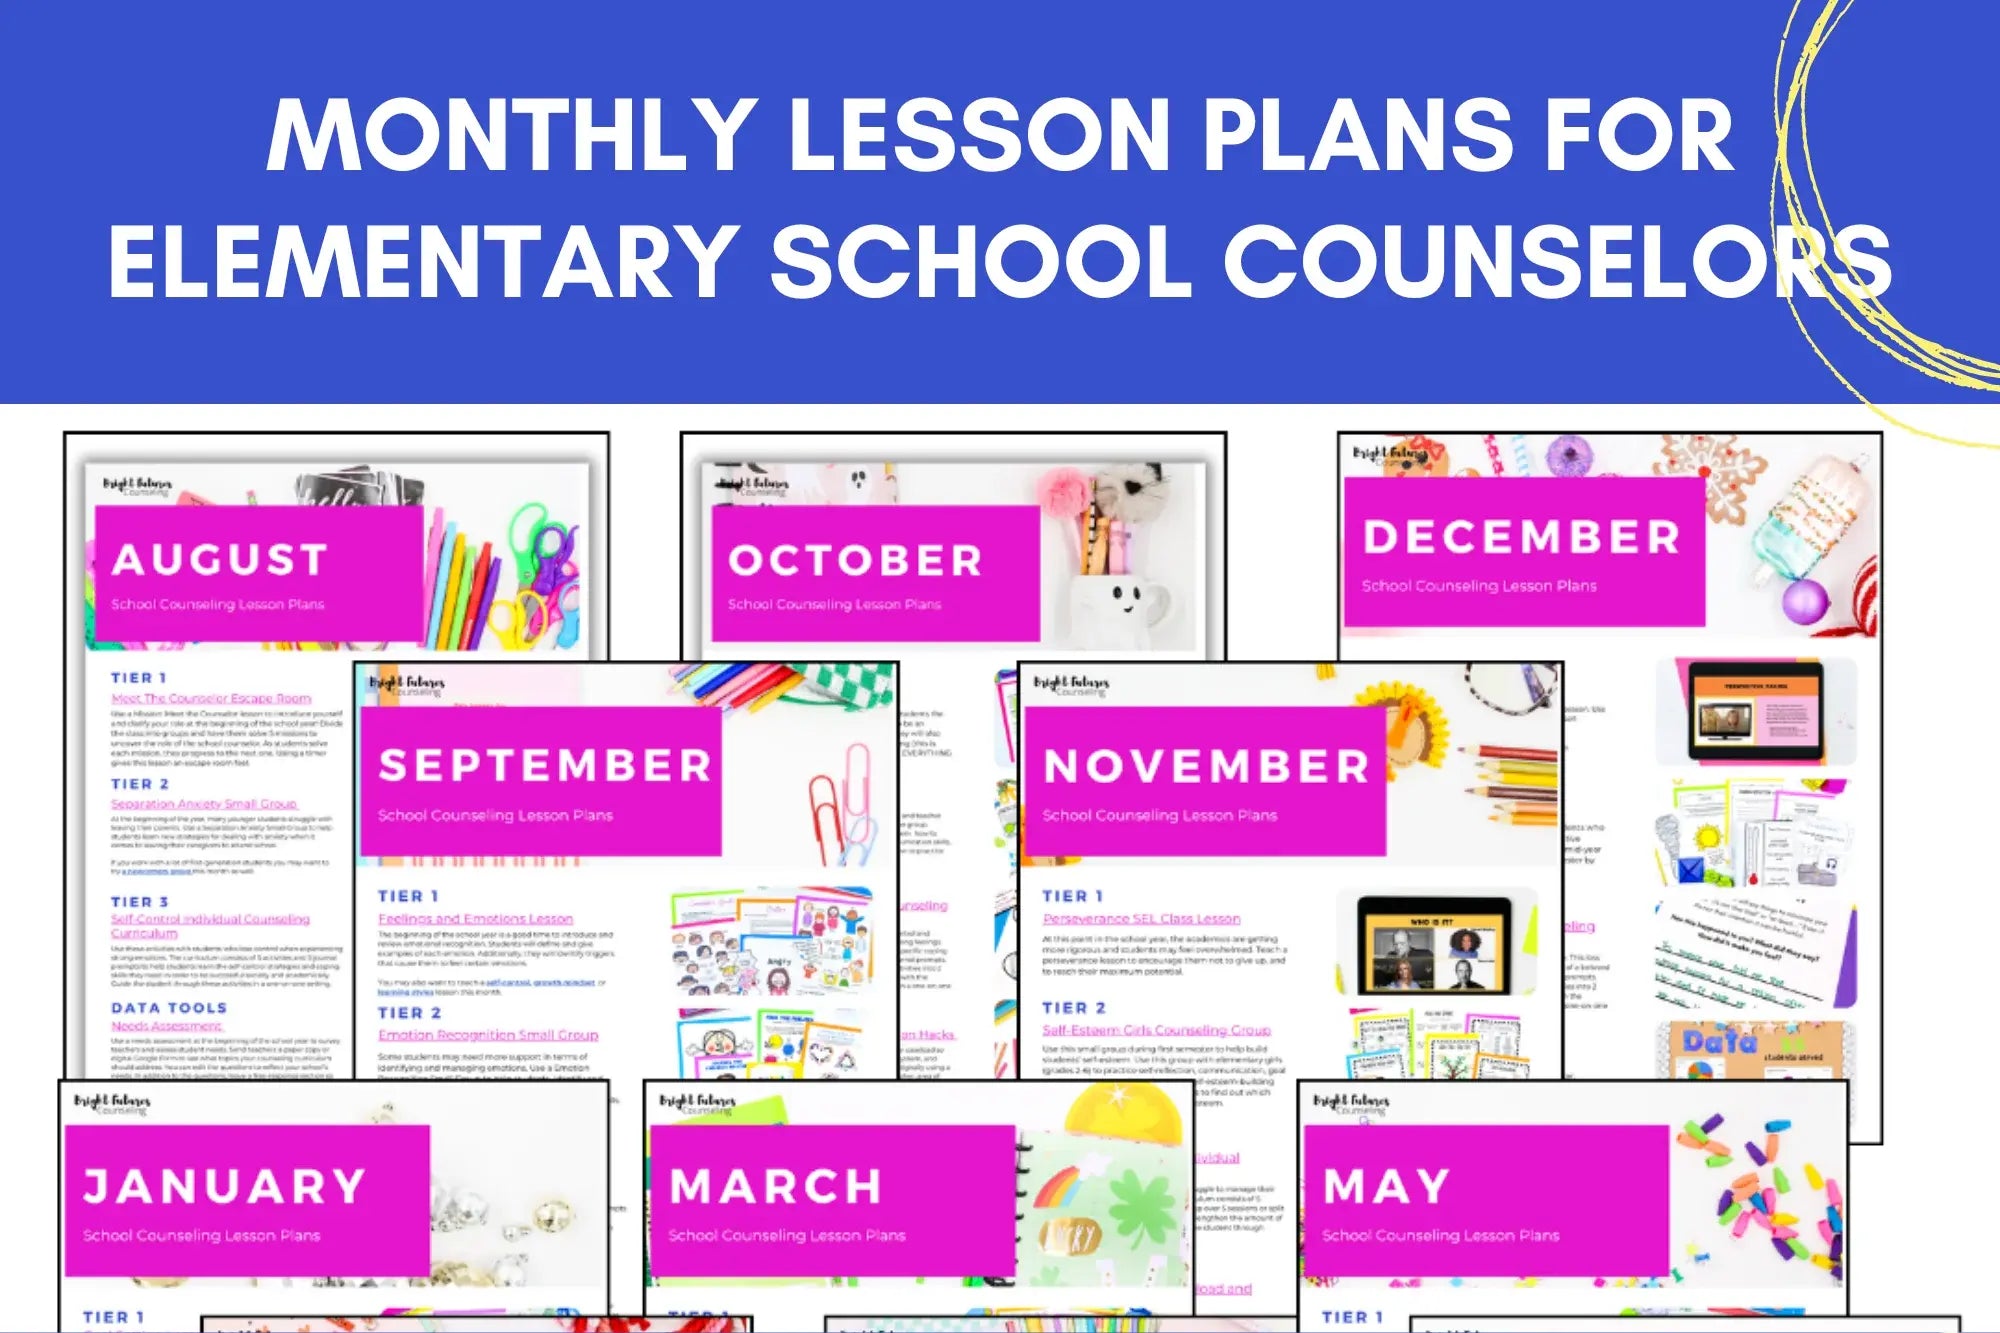 Monthly Lesson Plans for Elementary School Counselors